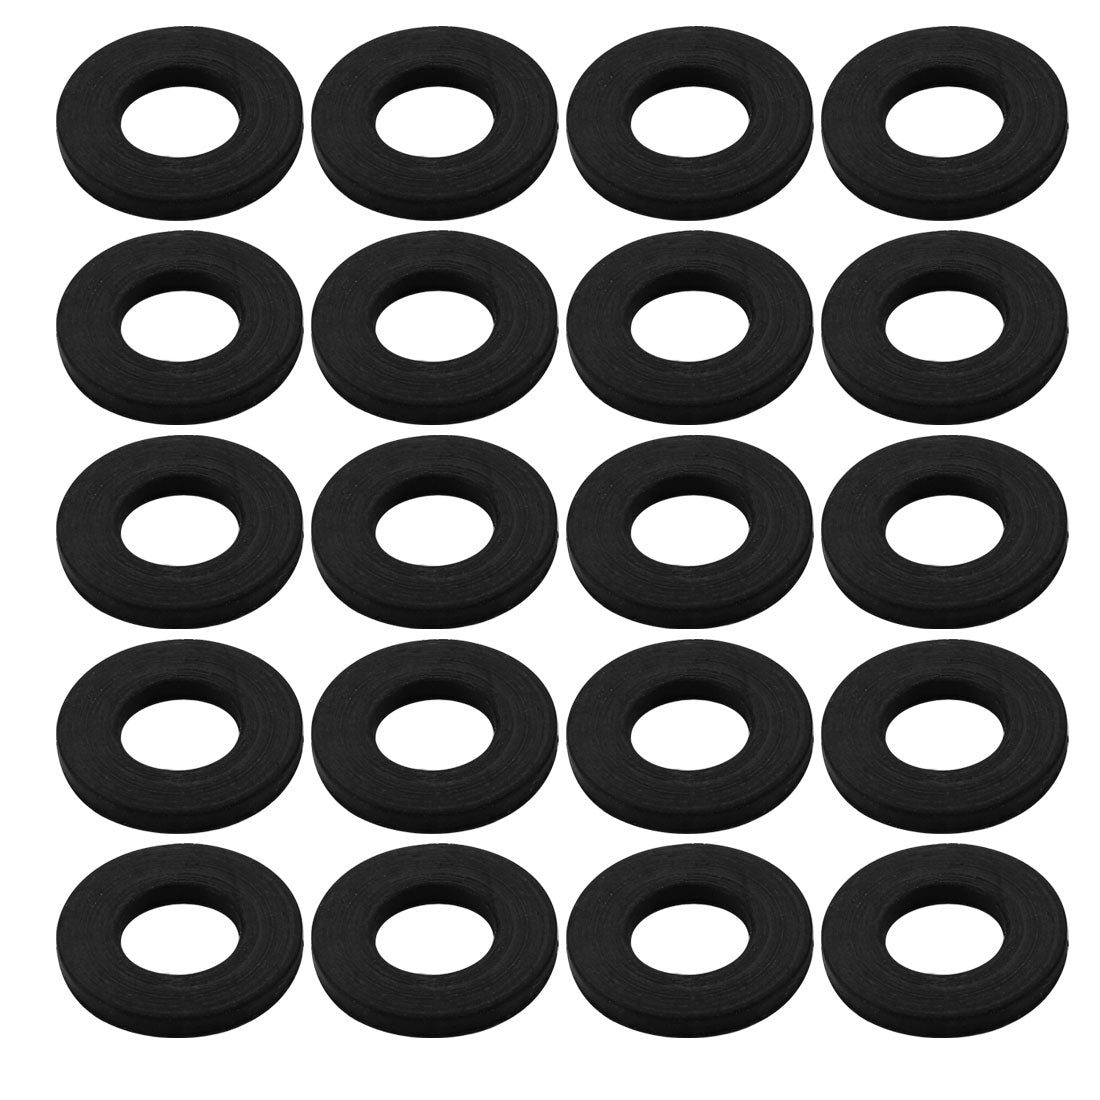 uxcell Uxcell 20Pcs 12mm x 24mm x 2.5mm Rubber Oil Sealing O-Rings Washer Gasket Black